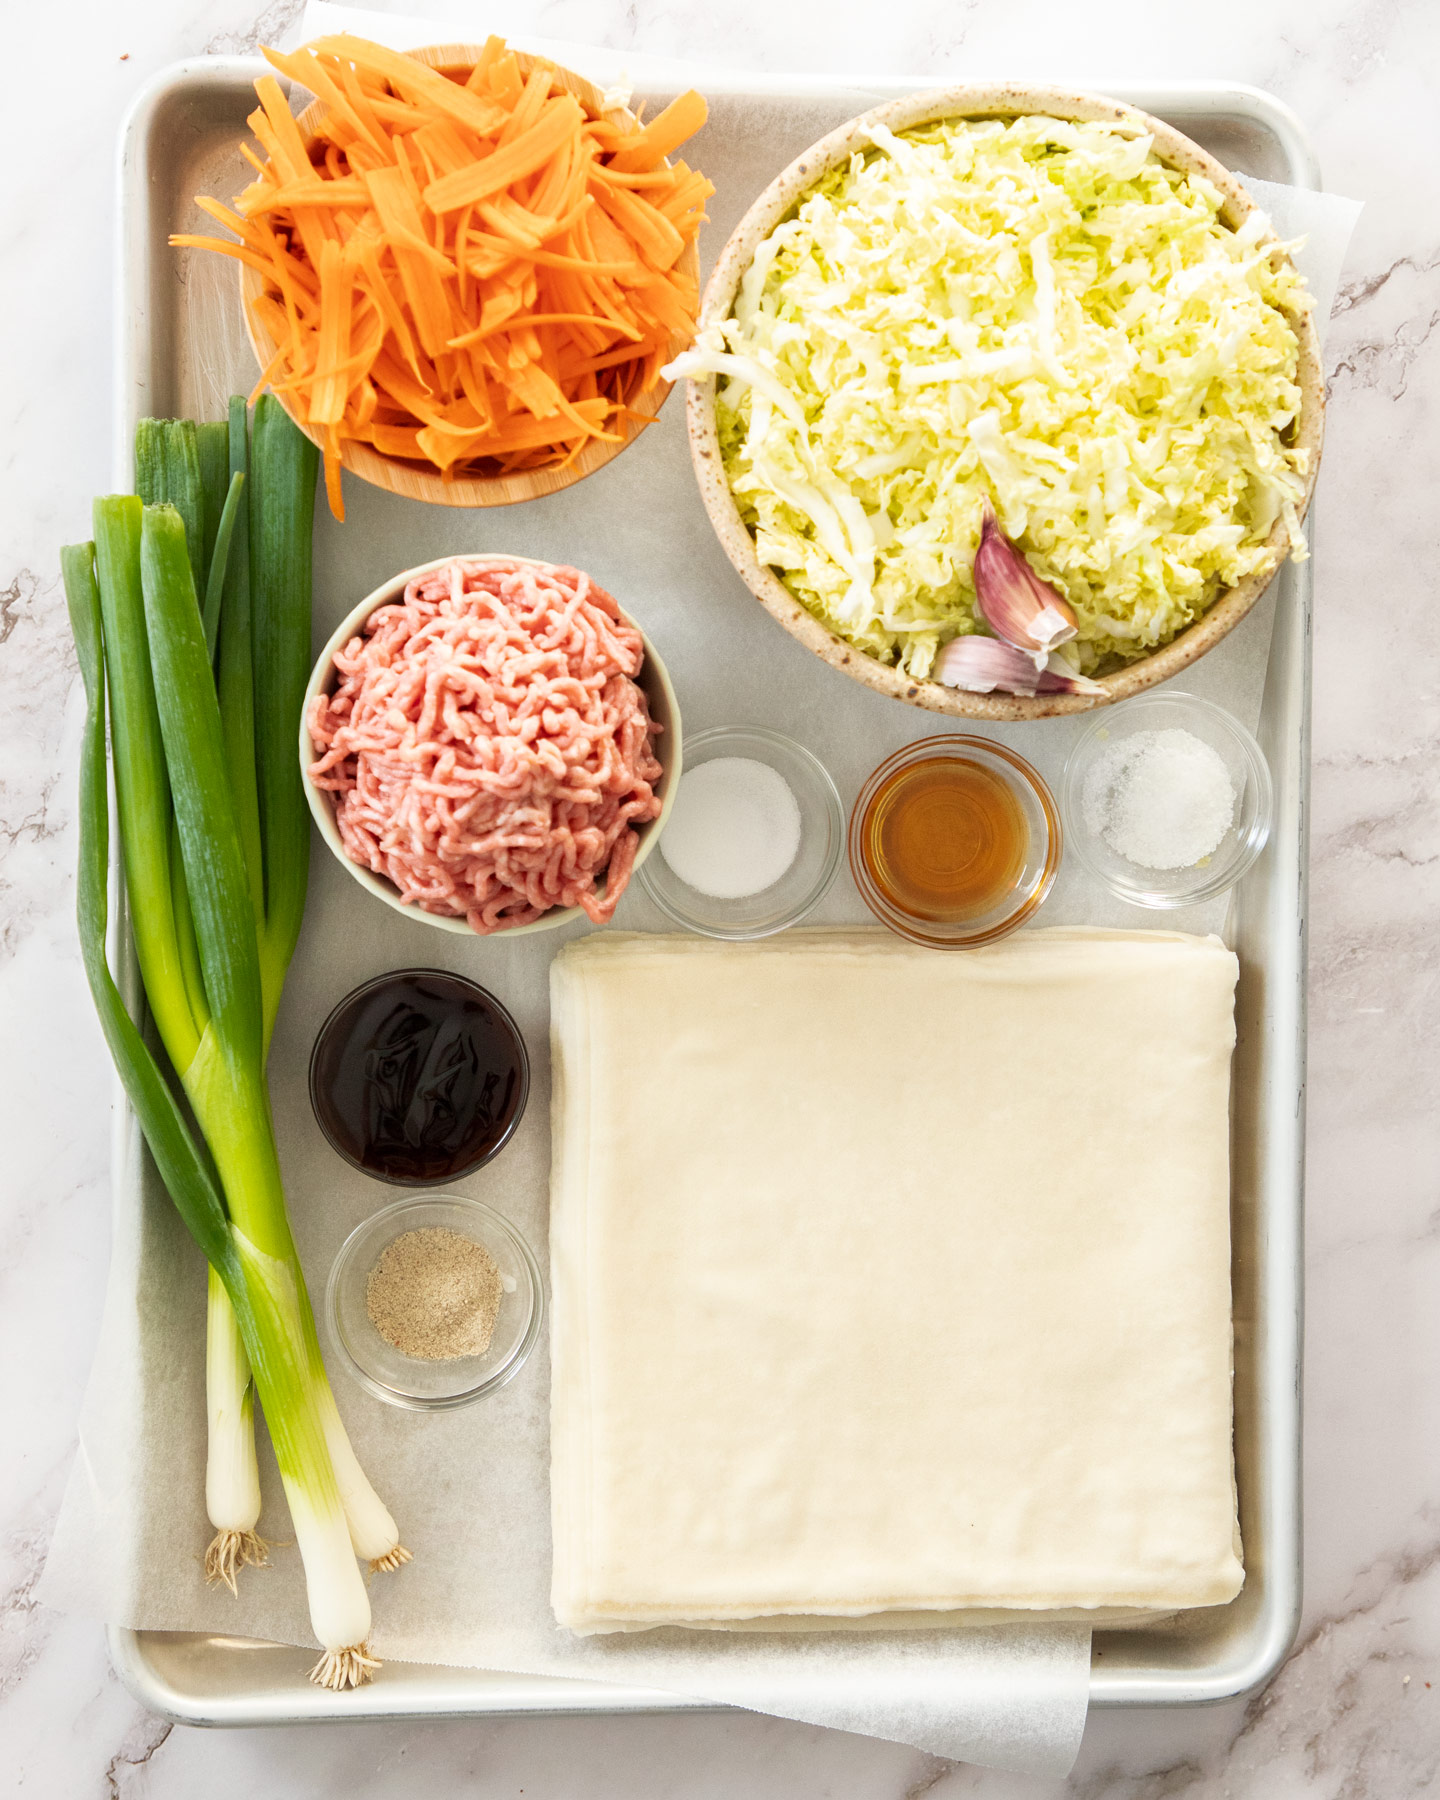 Ingredients for spring rolls on a baking tray.